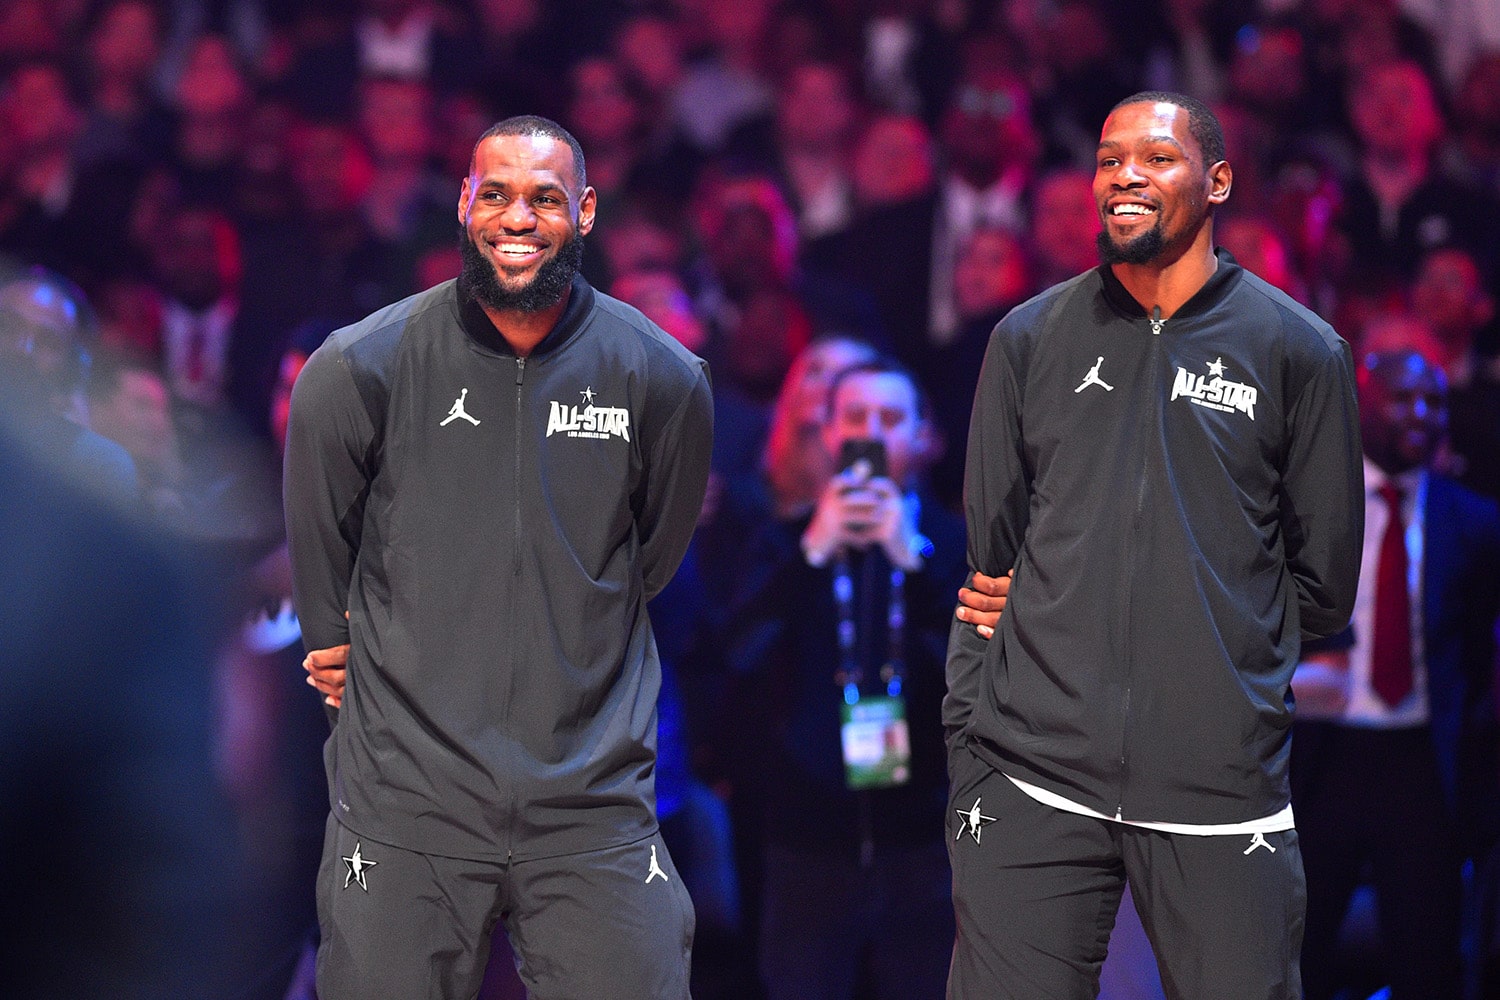 Mitchell & Ness ownership group now includes LeBron James, Joel